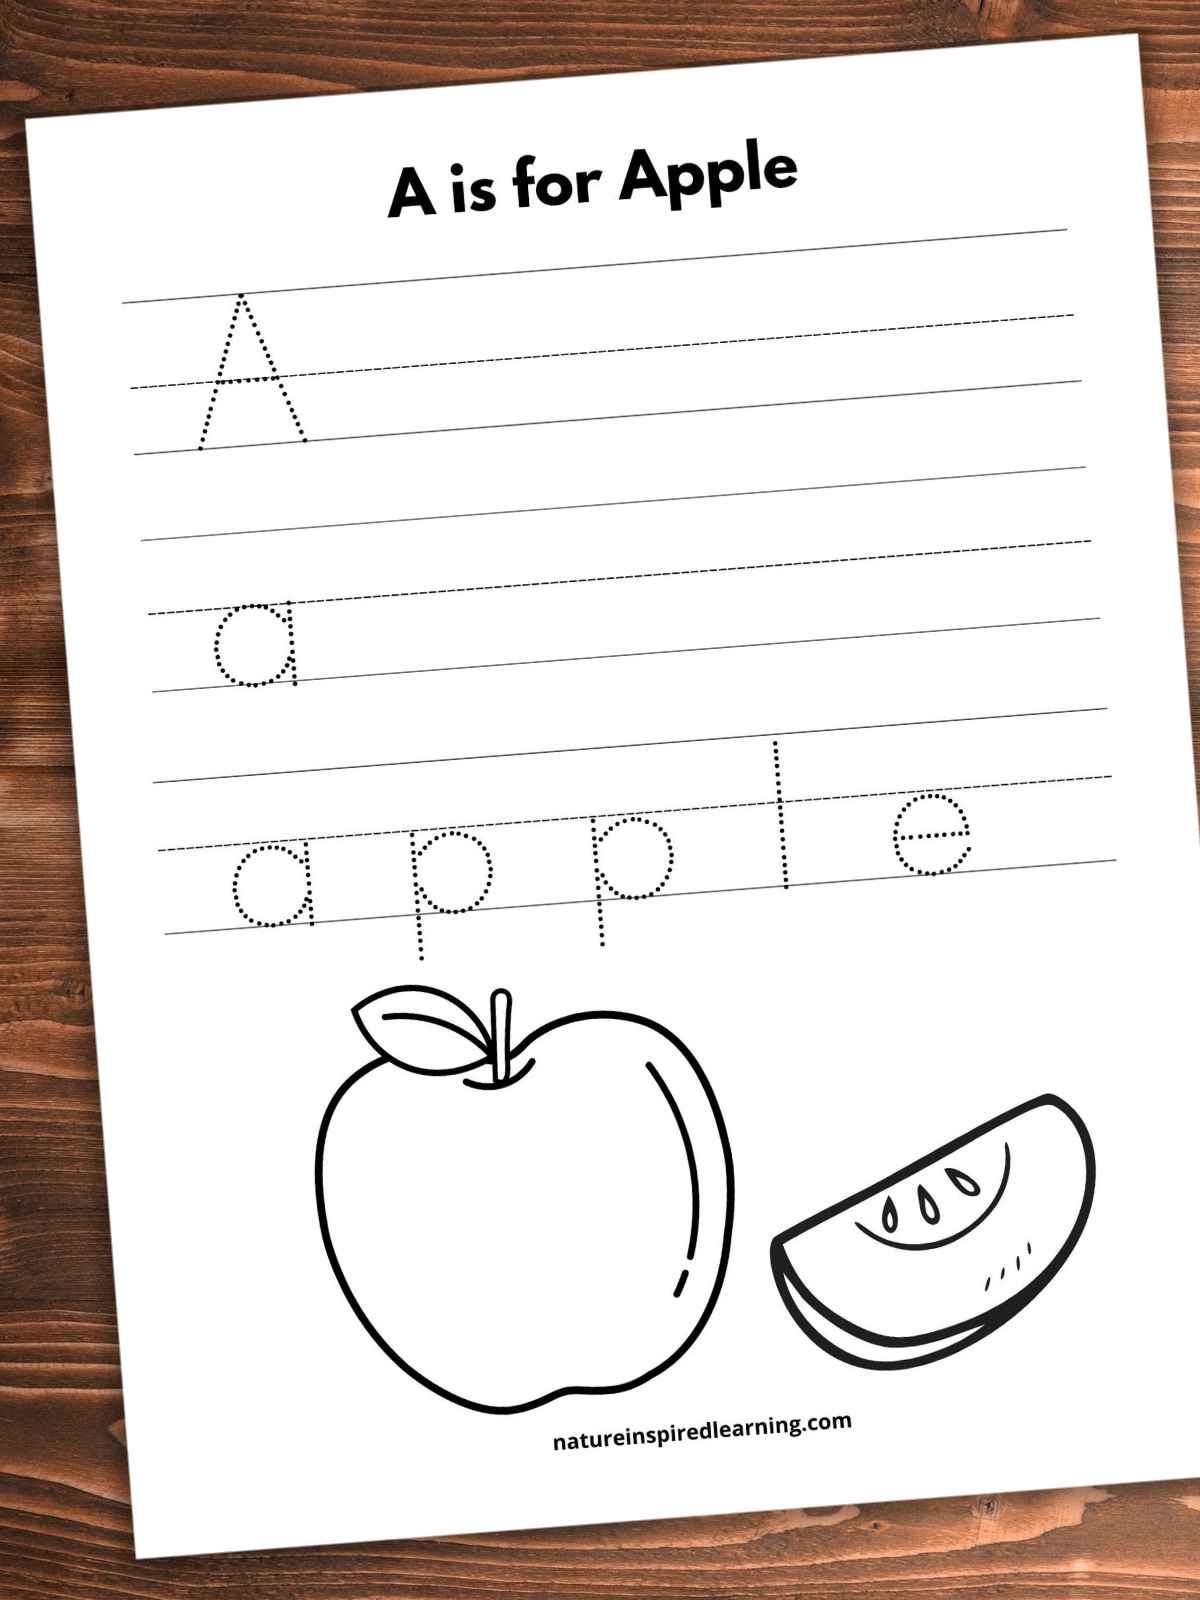 A is for Apple written in bold across top with lines with the letter A and a and a third set of lines with apple written in lowercase dotted letters. Black and white image of an apple with one slice across bottom half of worksheet. Printable slanted on a wooden background.